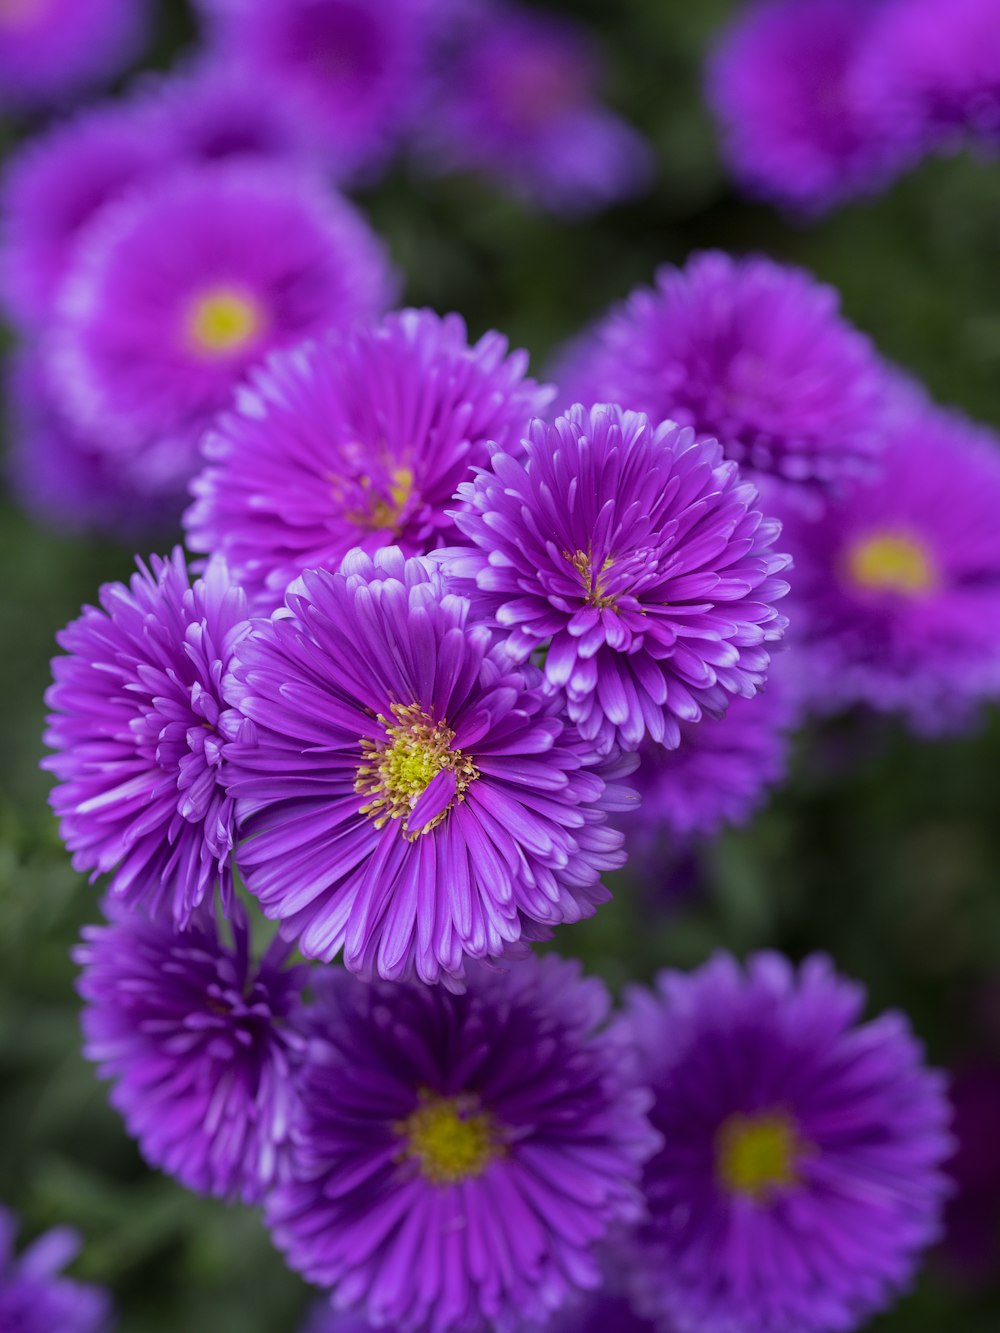 a bunch of purple flowers with yellow centers